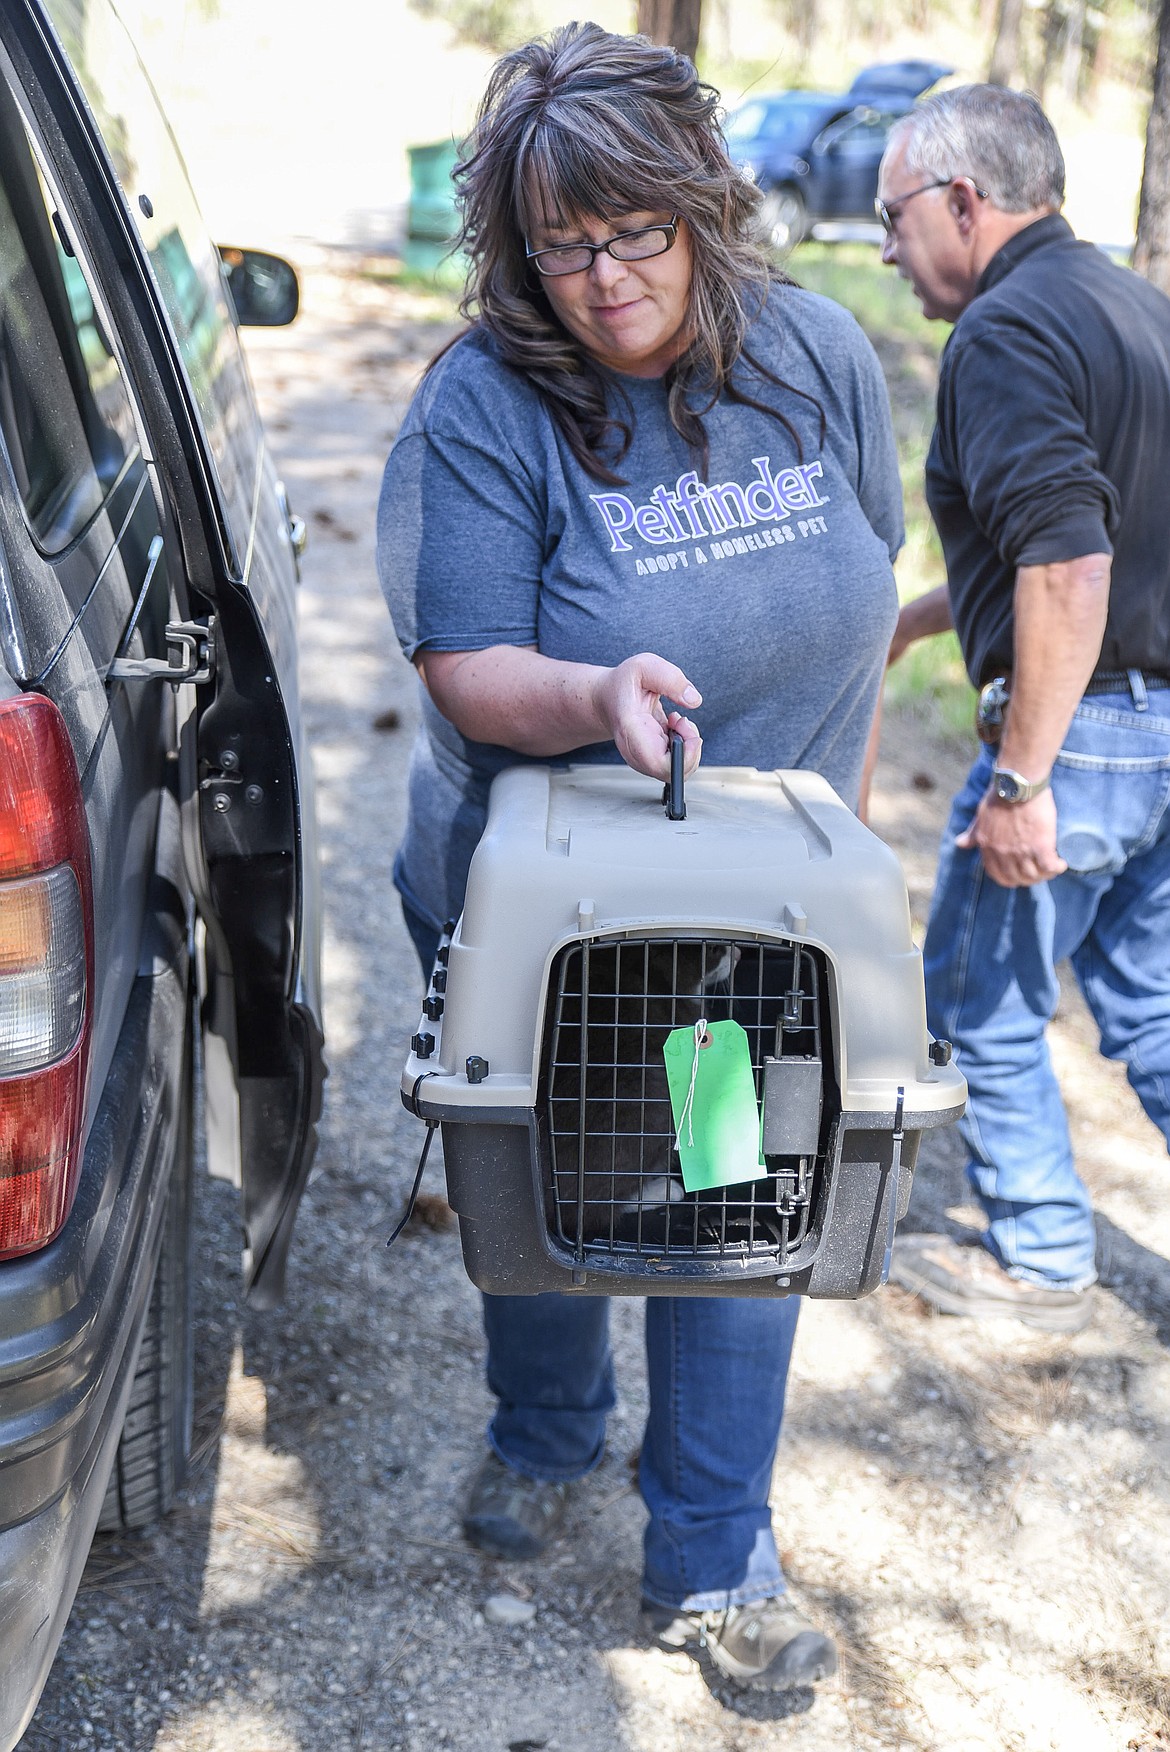 Tobacco Valley Animal Shelter Director Wendy Anderson unloads a carrier holding one of an estimated around 200 cats from a colony in the Yaak Friday, as Lincoln County Animal Control Officer Roger Guches goes to retrieve more cats from the van. (Ben Kibbey/The Western News)